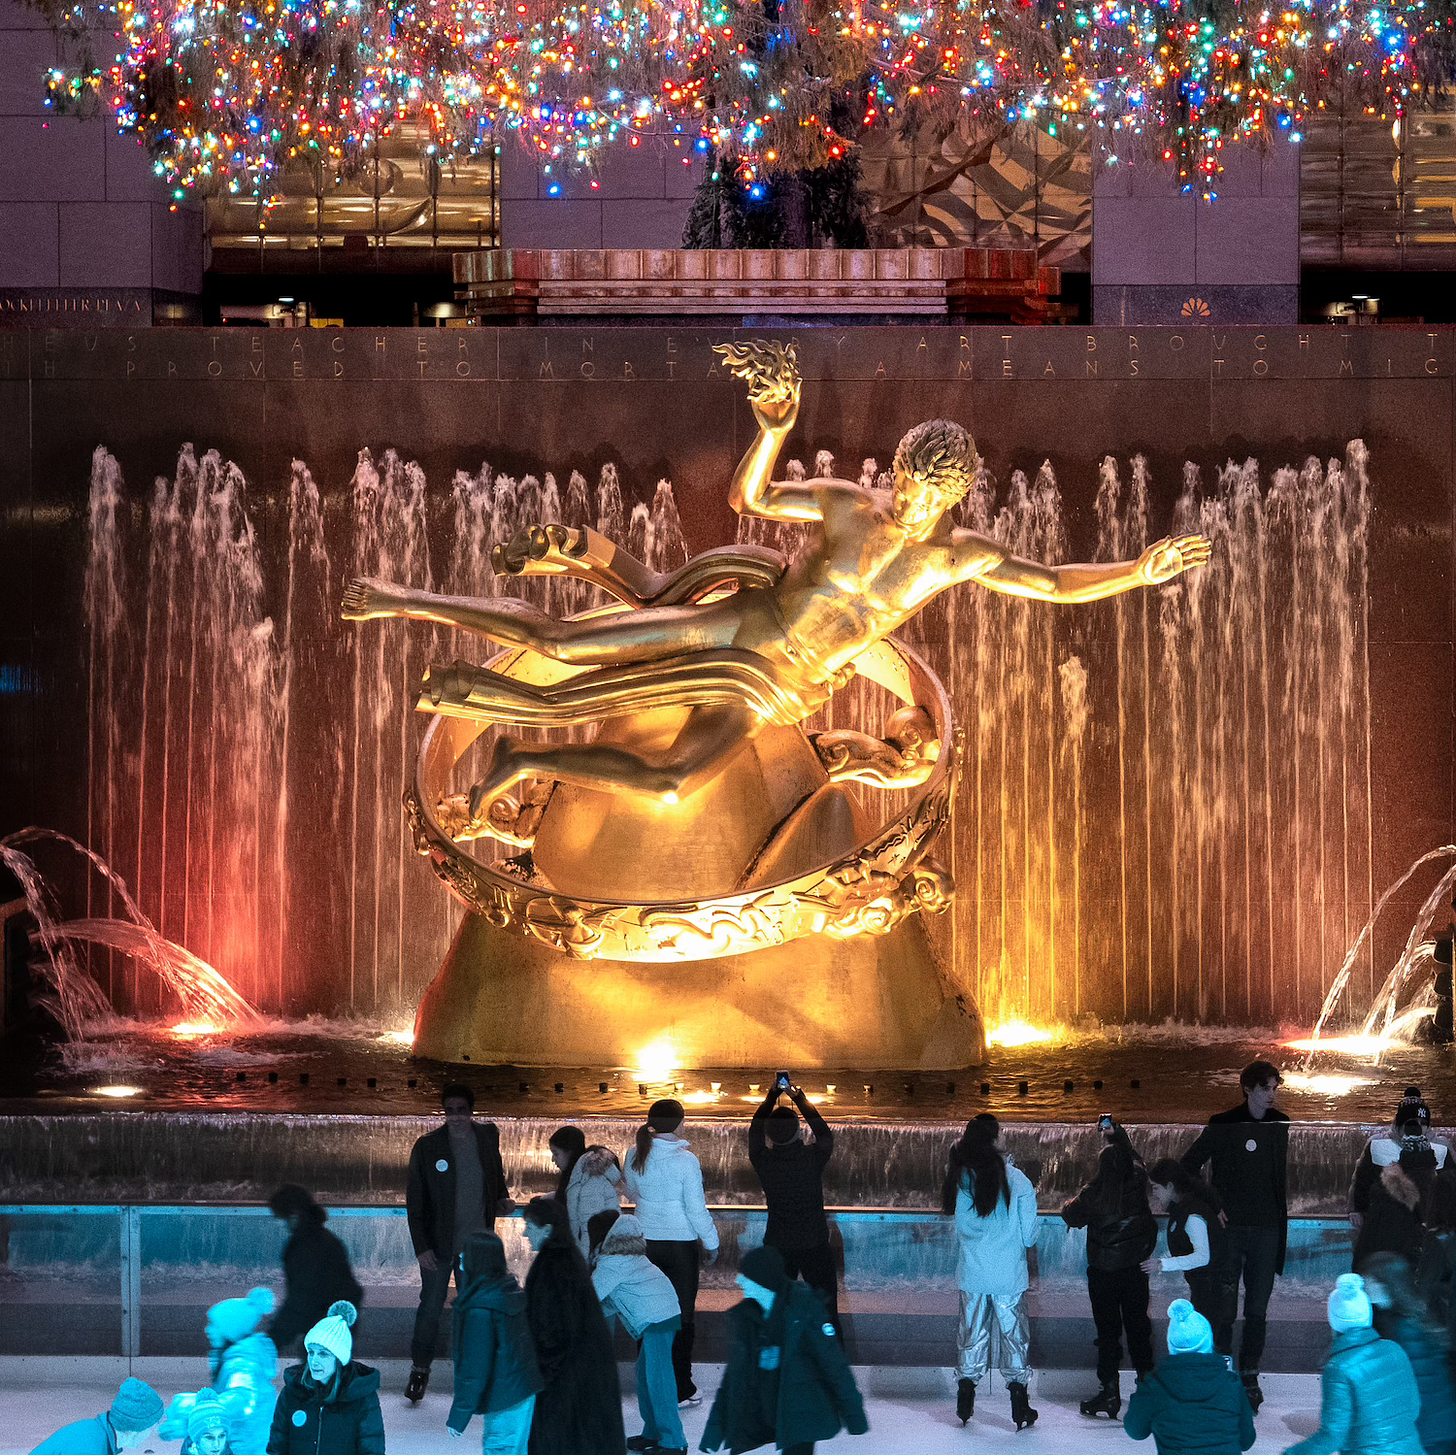 Statue of Prometheus at Rockefeller Center beneath a Christmas tree and overlooking a skating rink.